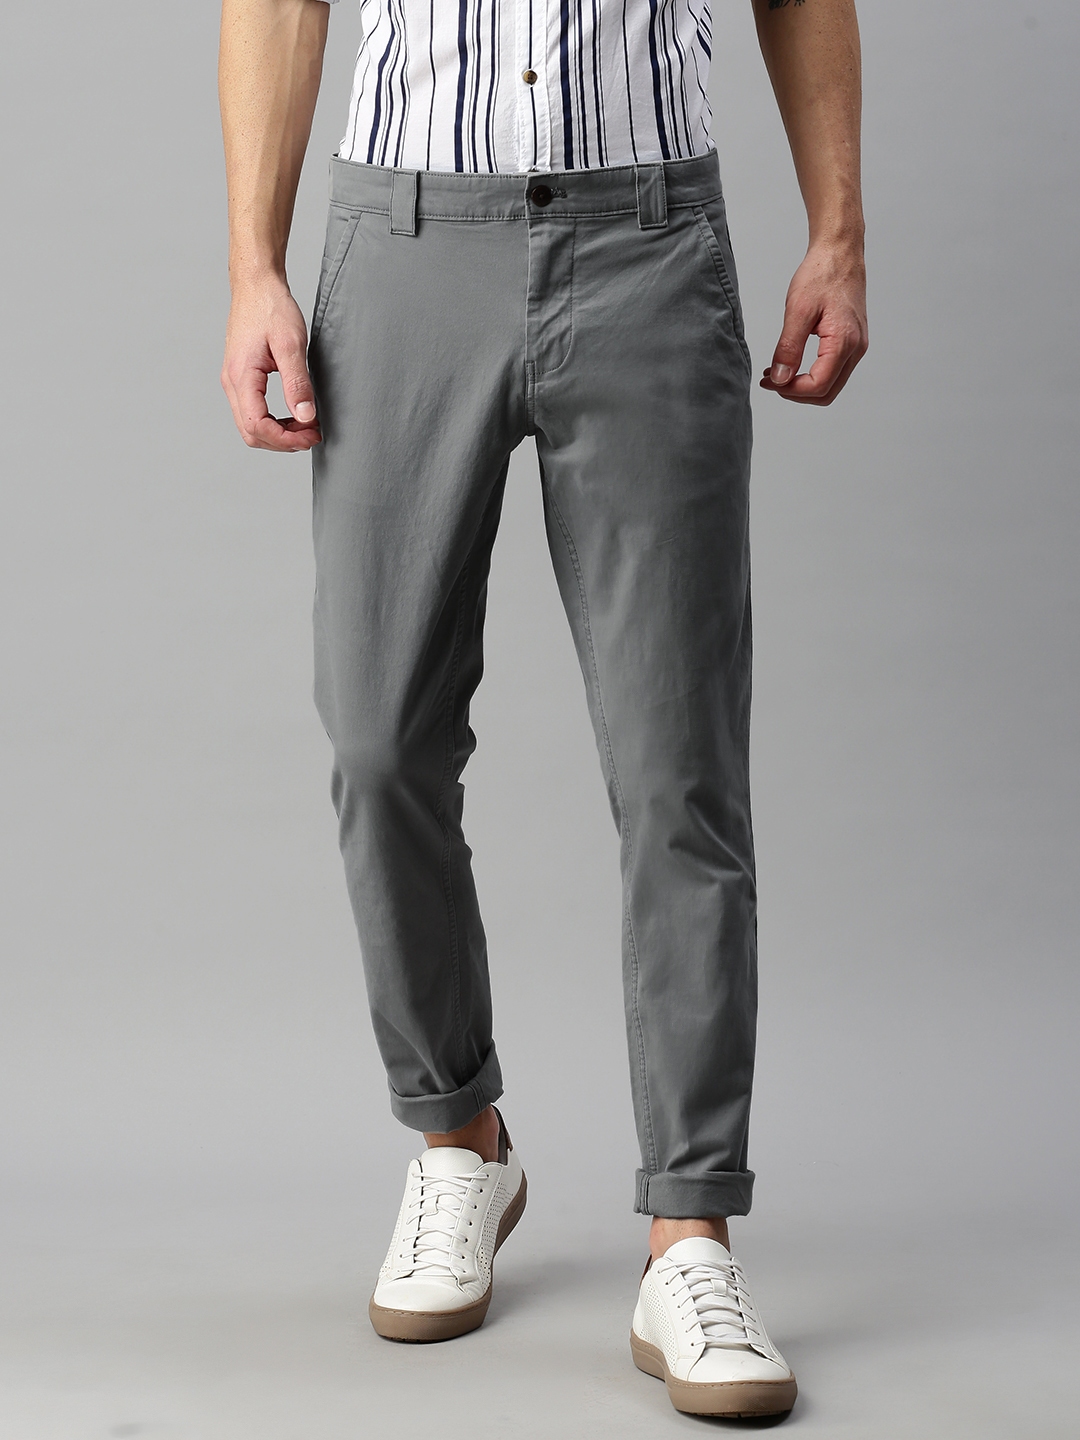 Buy Tommy Hilfiger Men Grey Solid Slim Fit Chinos Trousers - Trousers ...